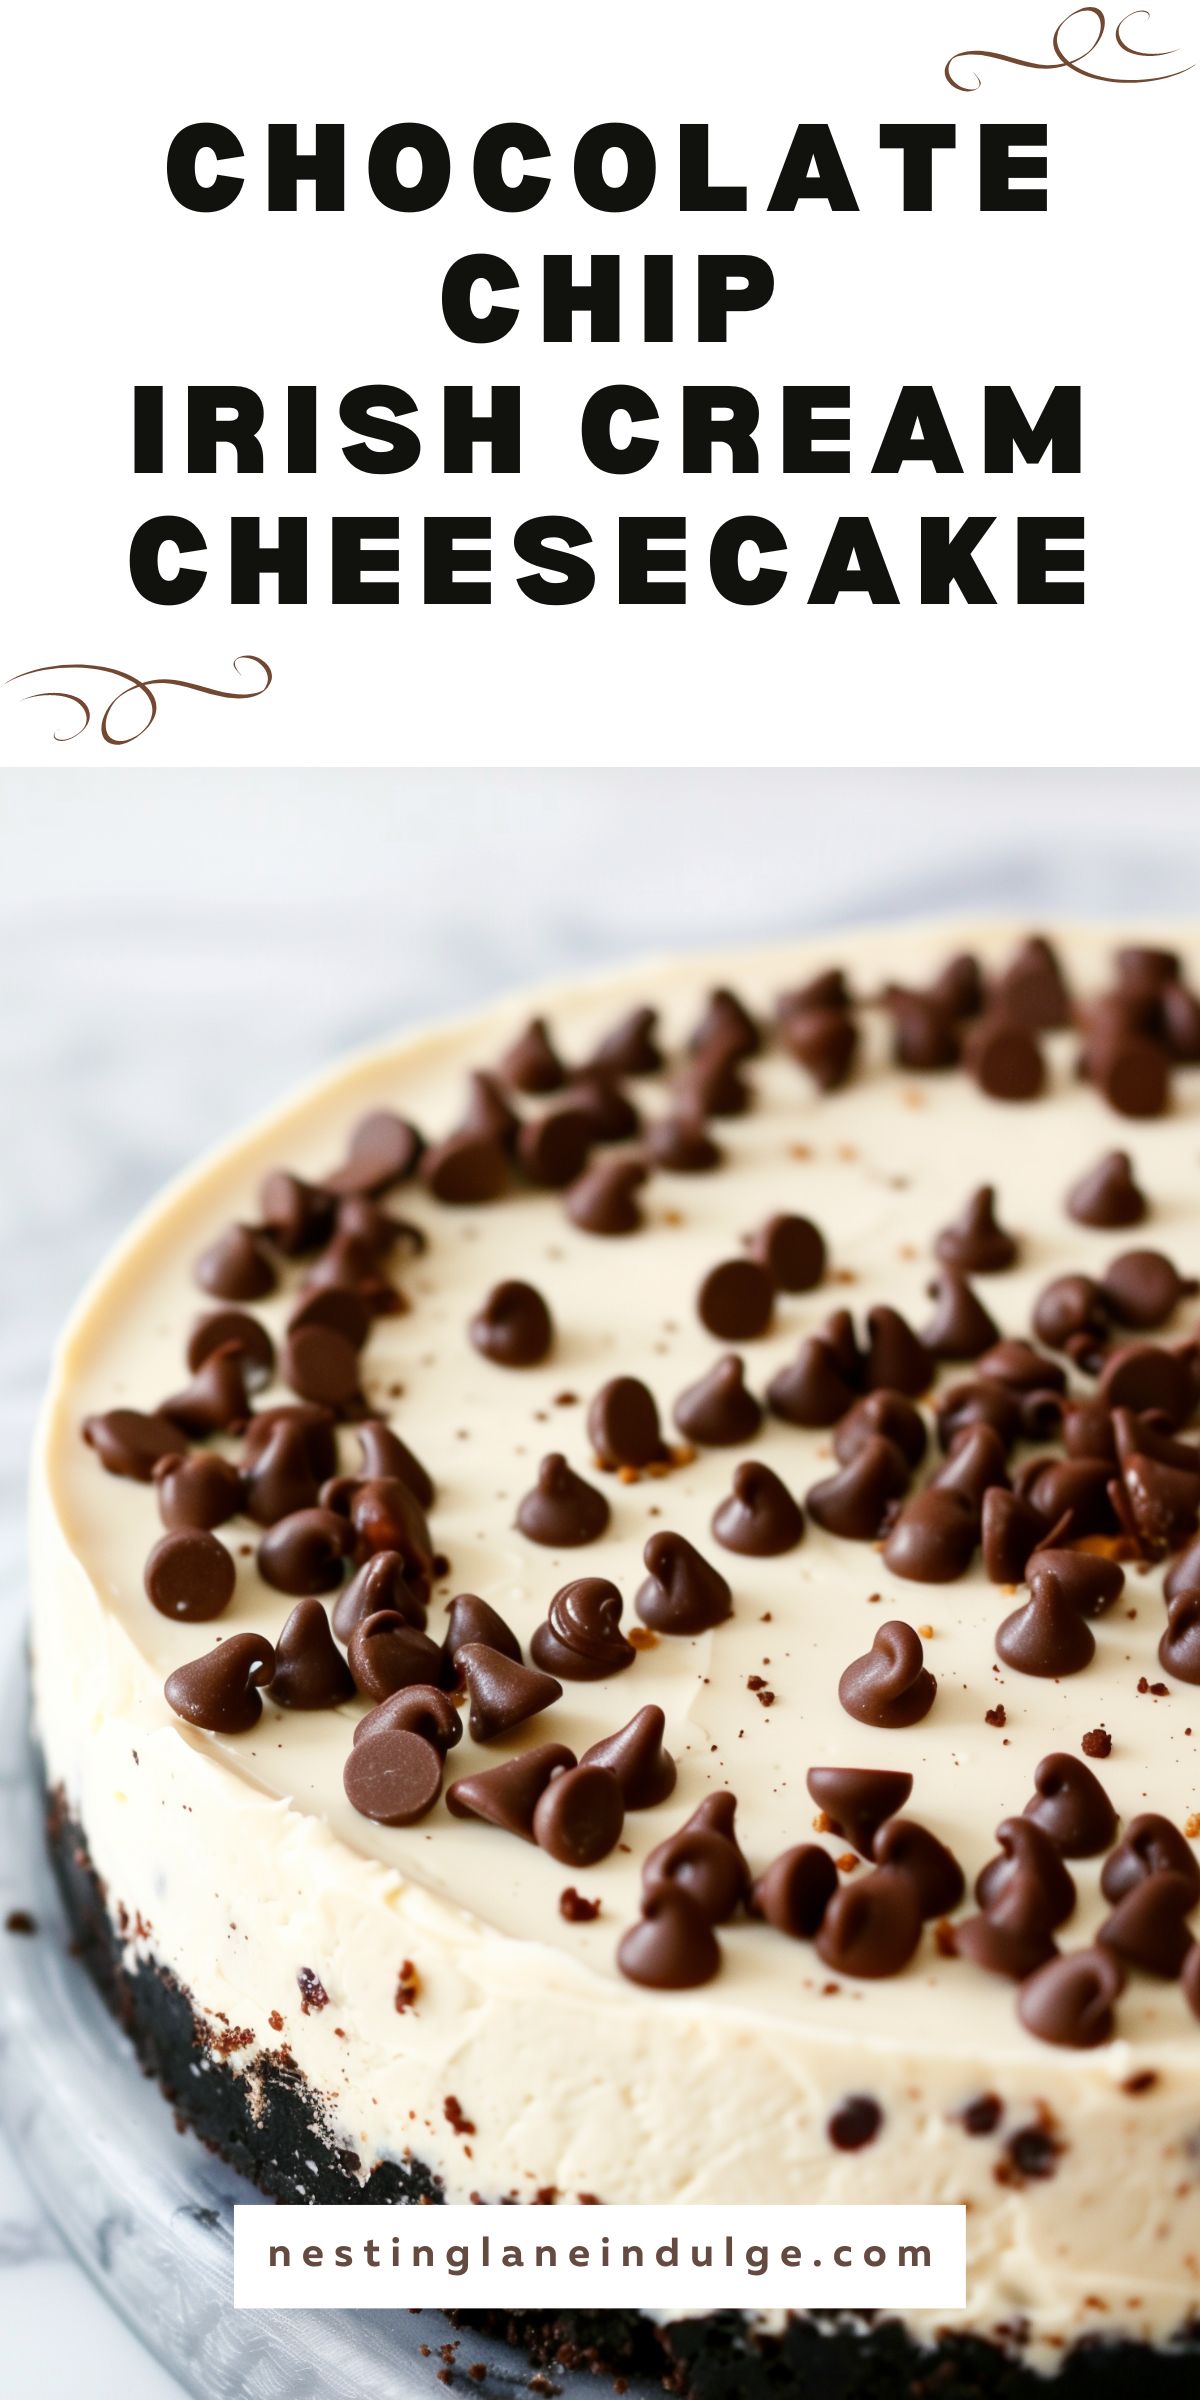 A whole Chocolate Chip Irish Cream Cheesecake with a black cookie crust, garnished with chocolate chips on top, displayed on a white background with the text 'nestinglaneindulge.com'